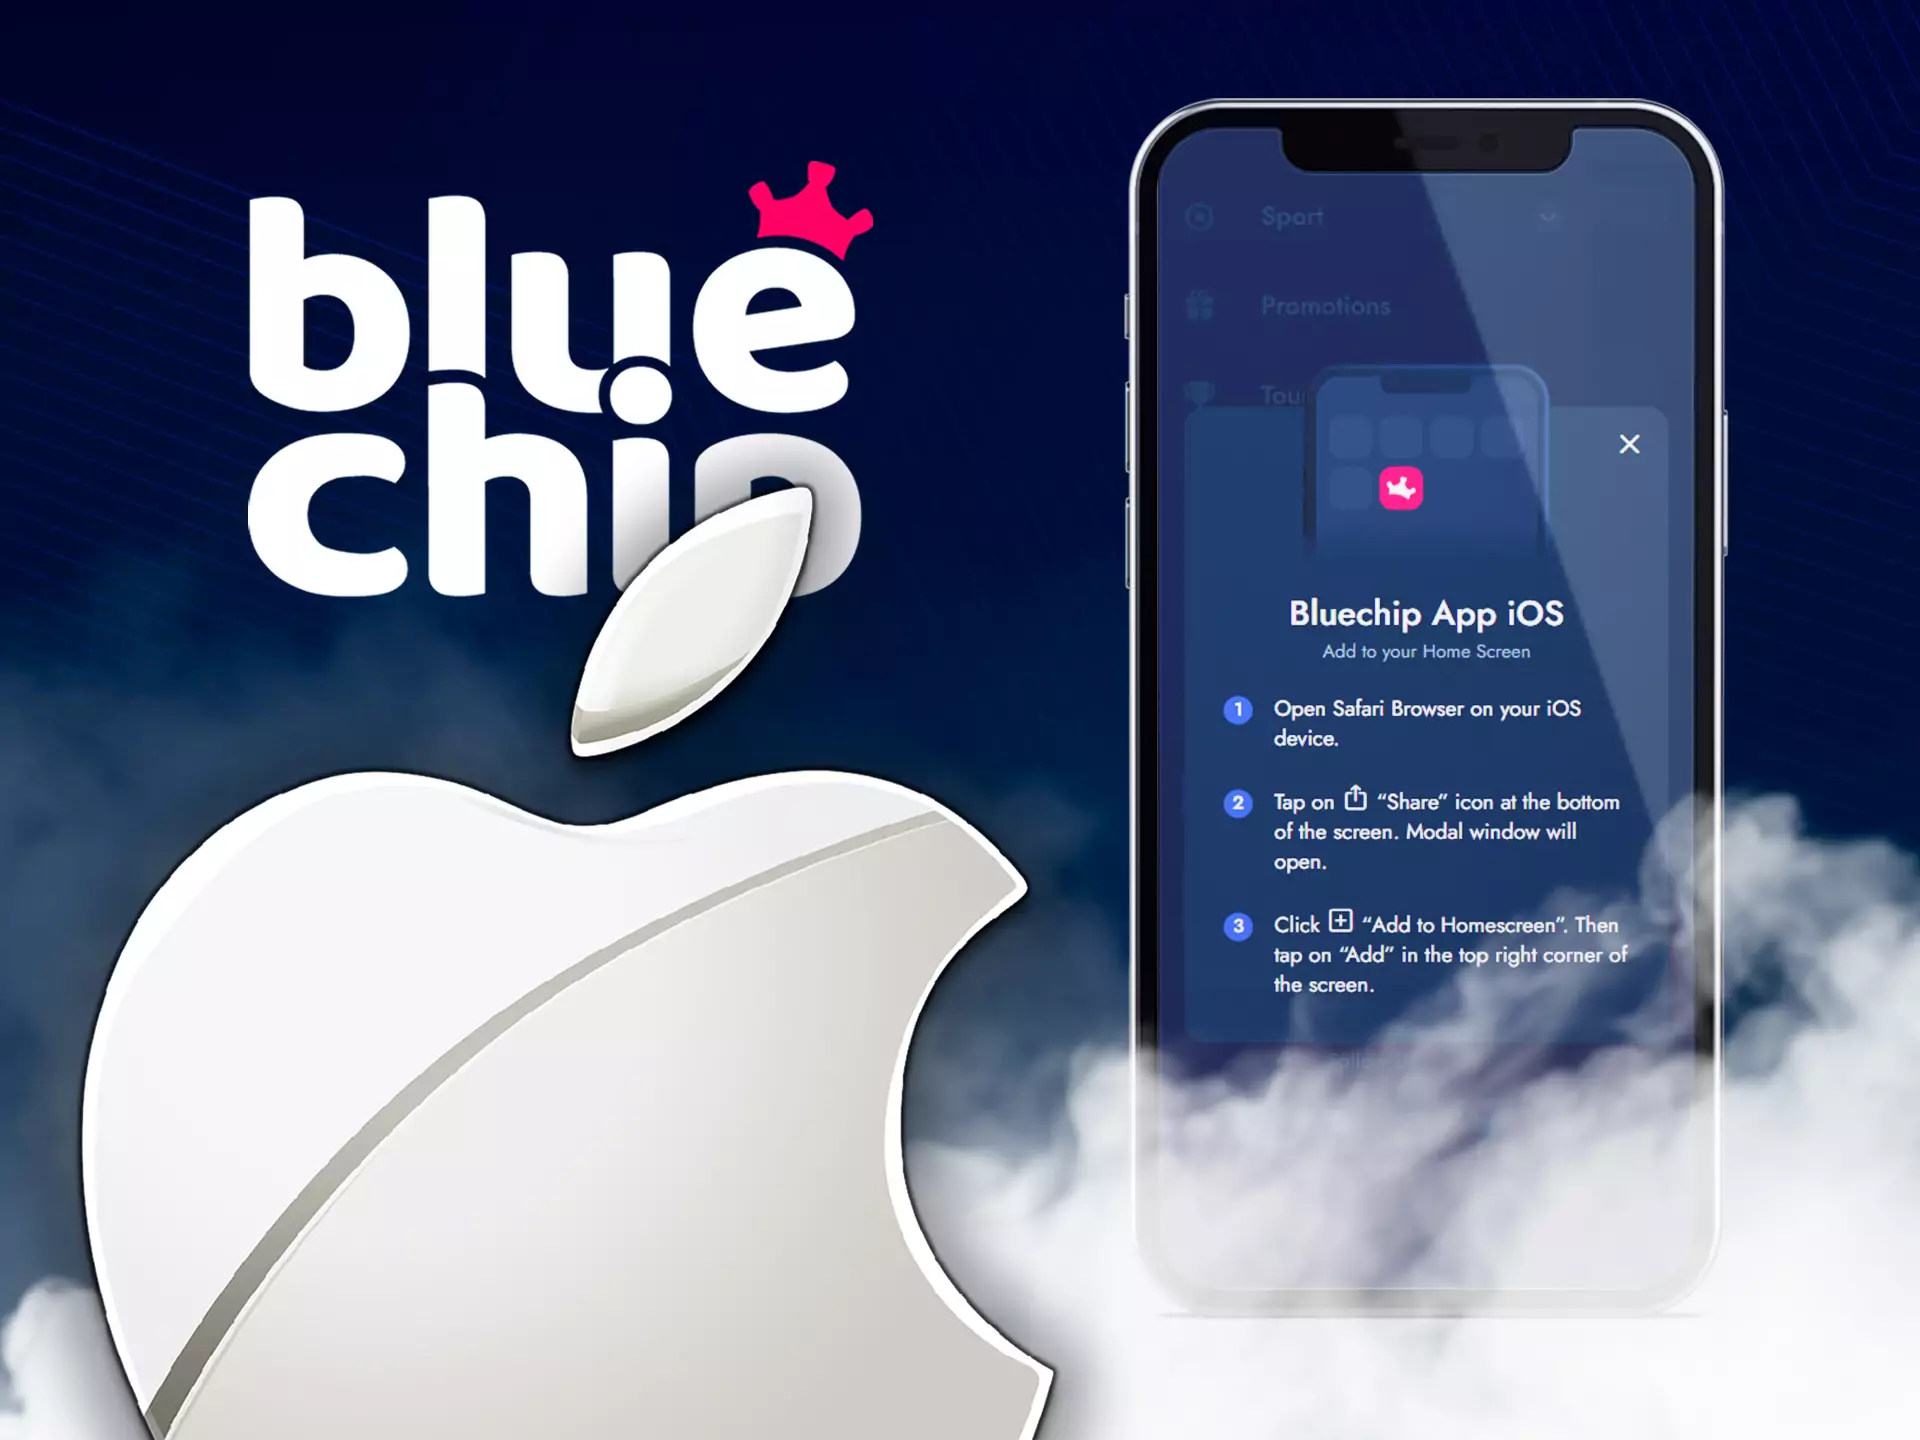 There is an app version of Bluechip for iOS as well.